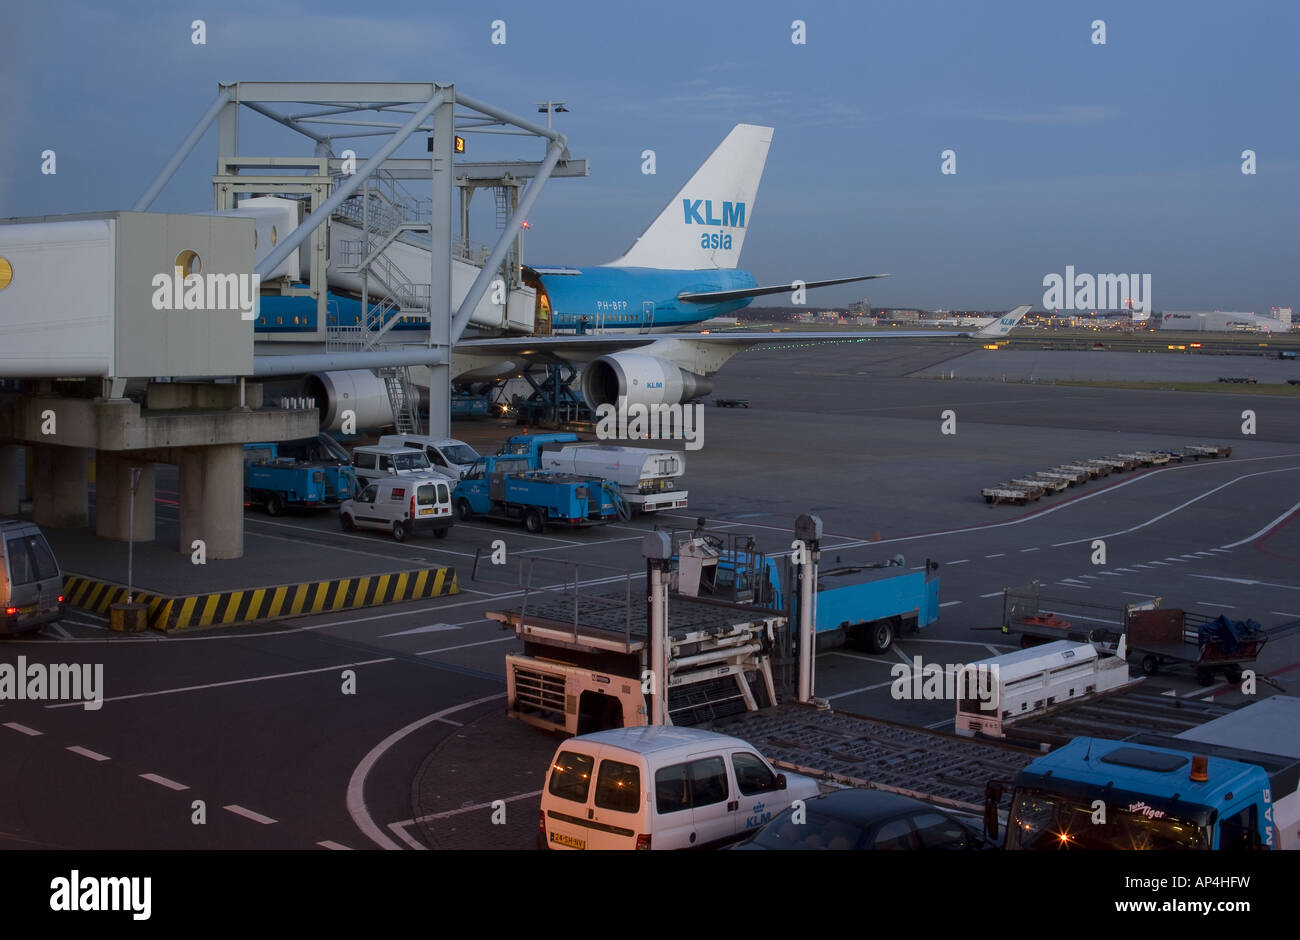 A KLM Cargo configuration Boeing 747 400 is being prepared for its long haul flight at the gate in Amsterdam Shiphol airport Stock Photo